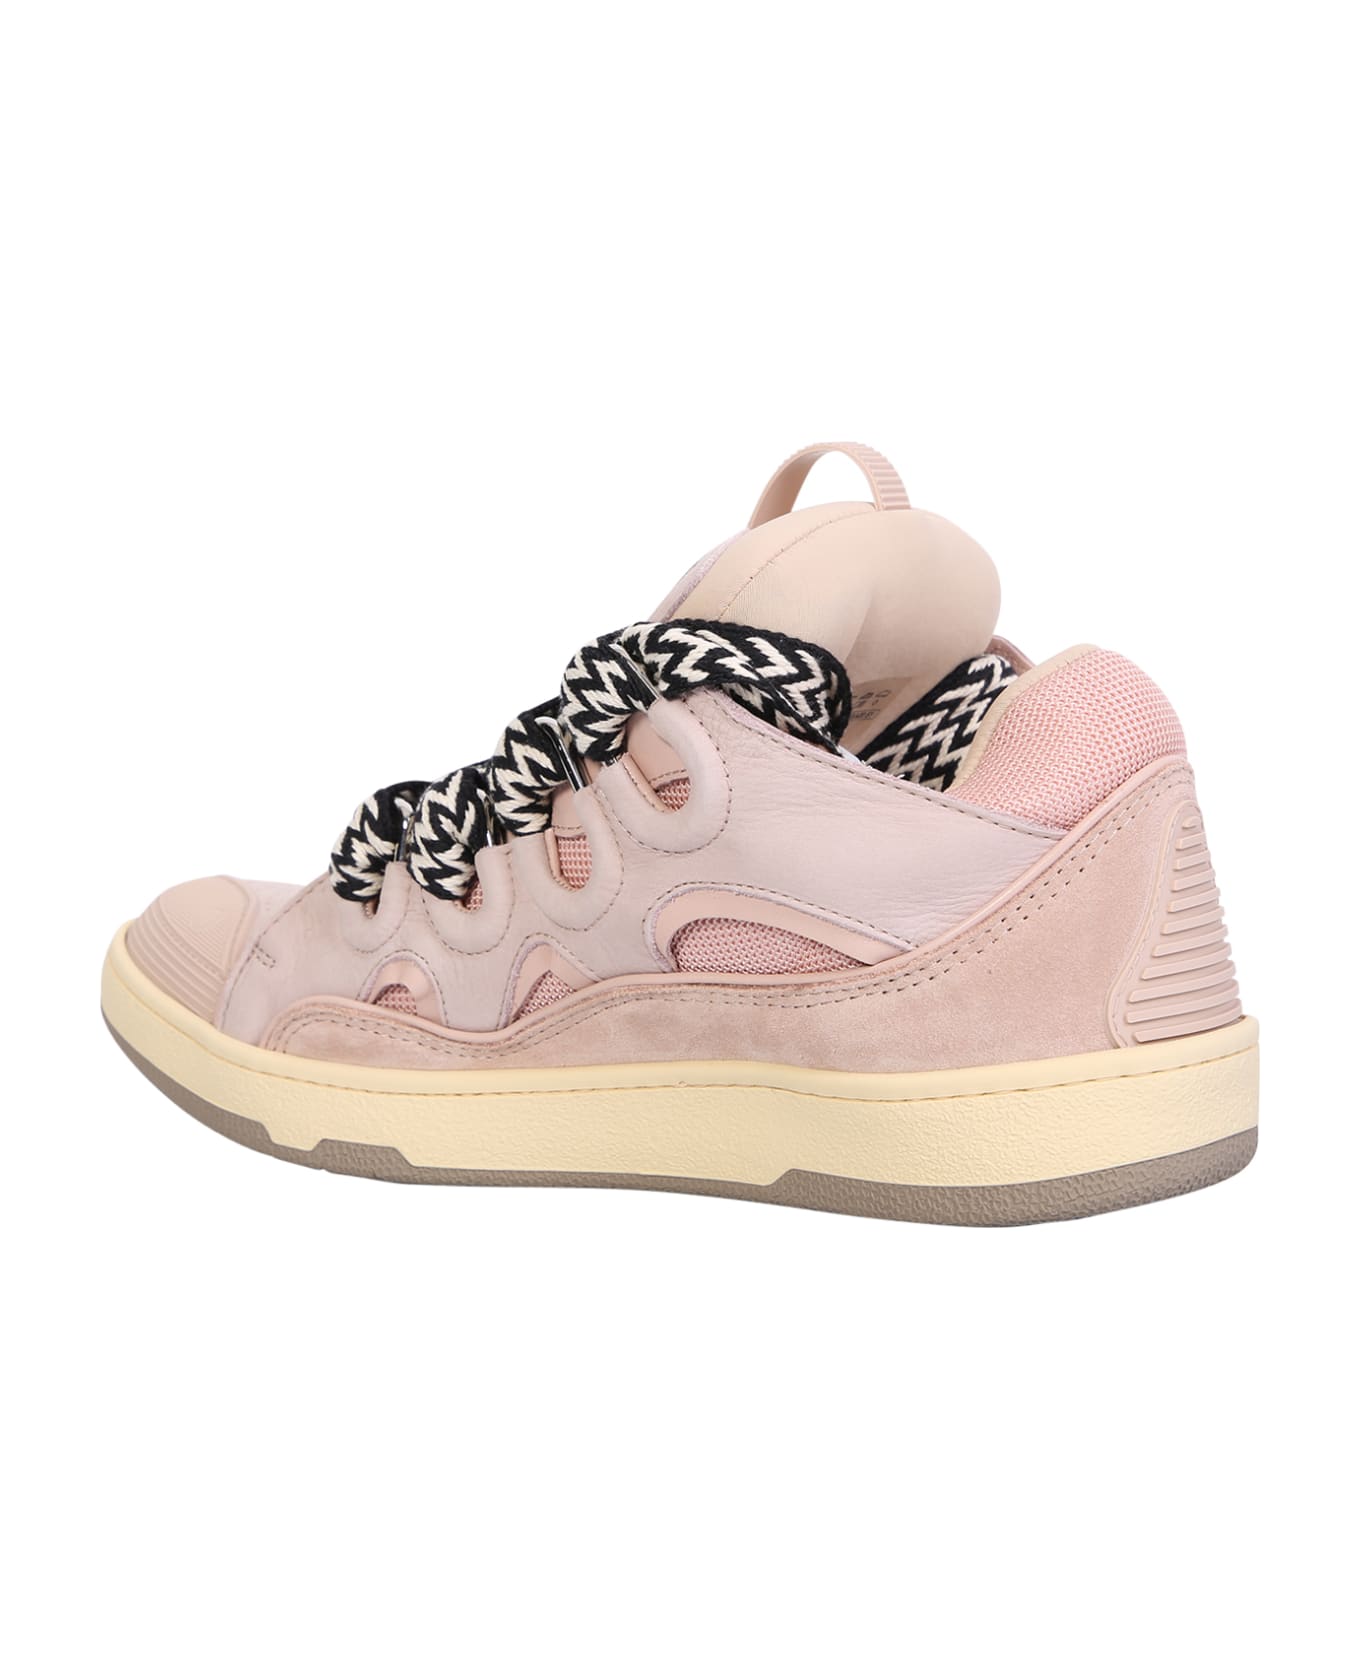 Lanvin 'curb' Sneakers - Pink スニーカー